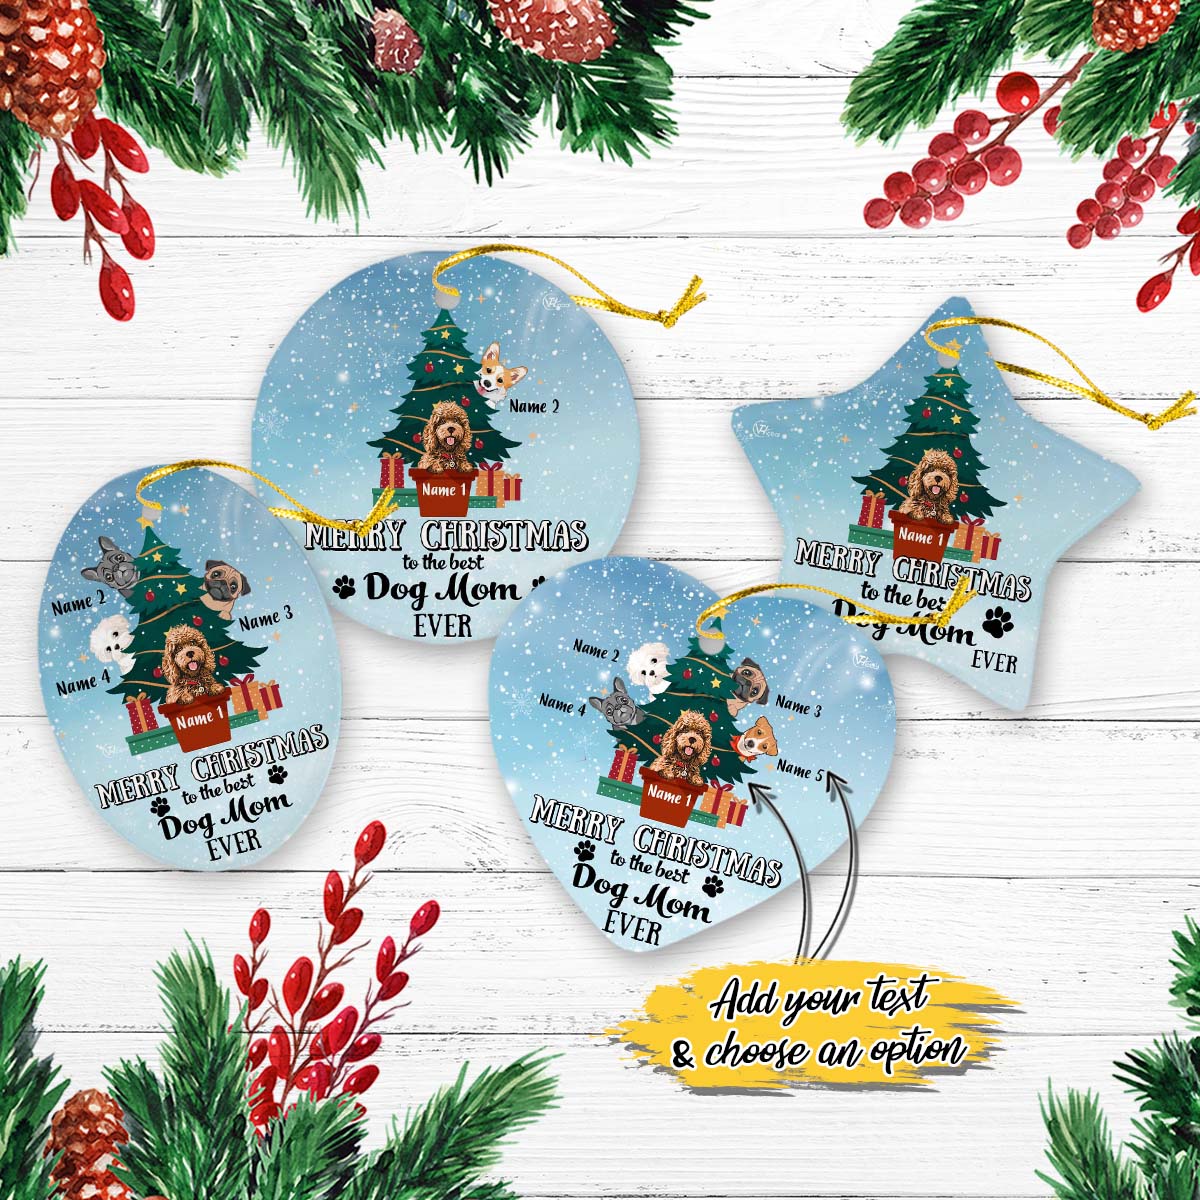 Merry Christmas To The Best Dog Mom Ever Personalized Christmas Premium Ceramic Ornaments Sets